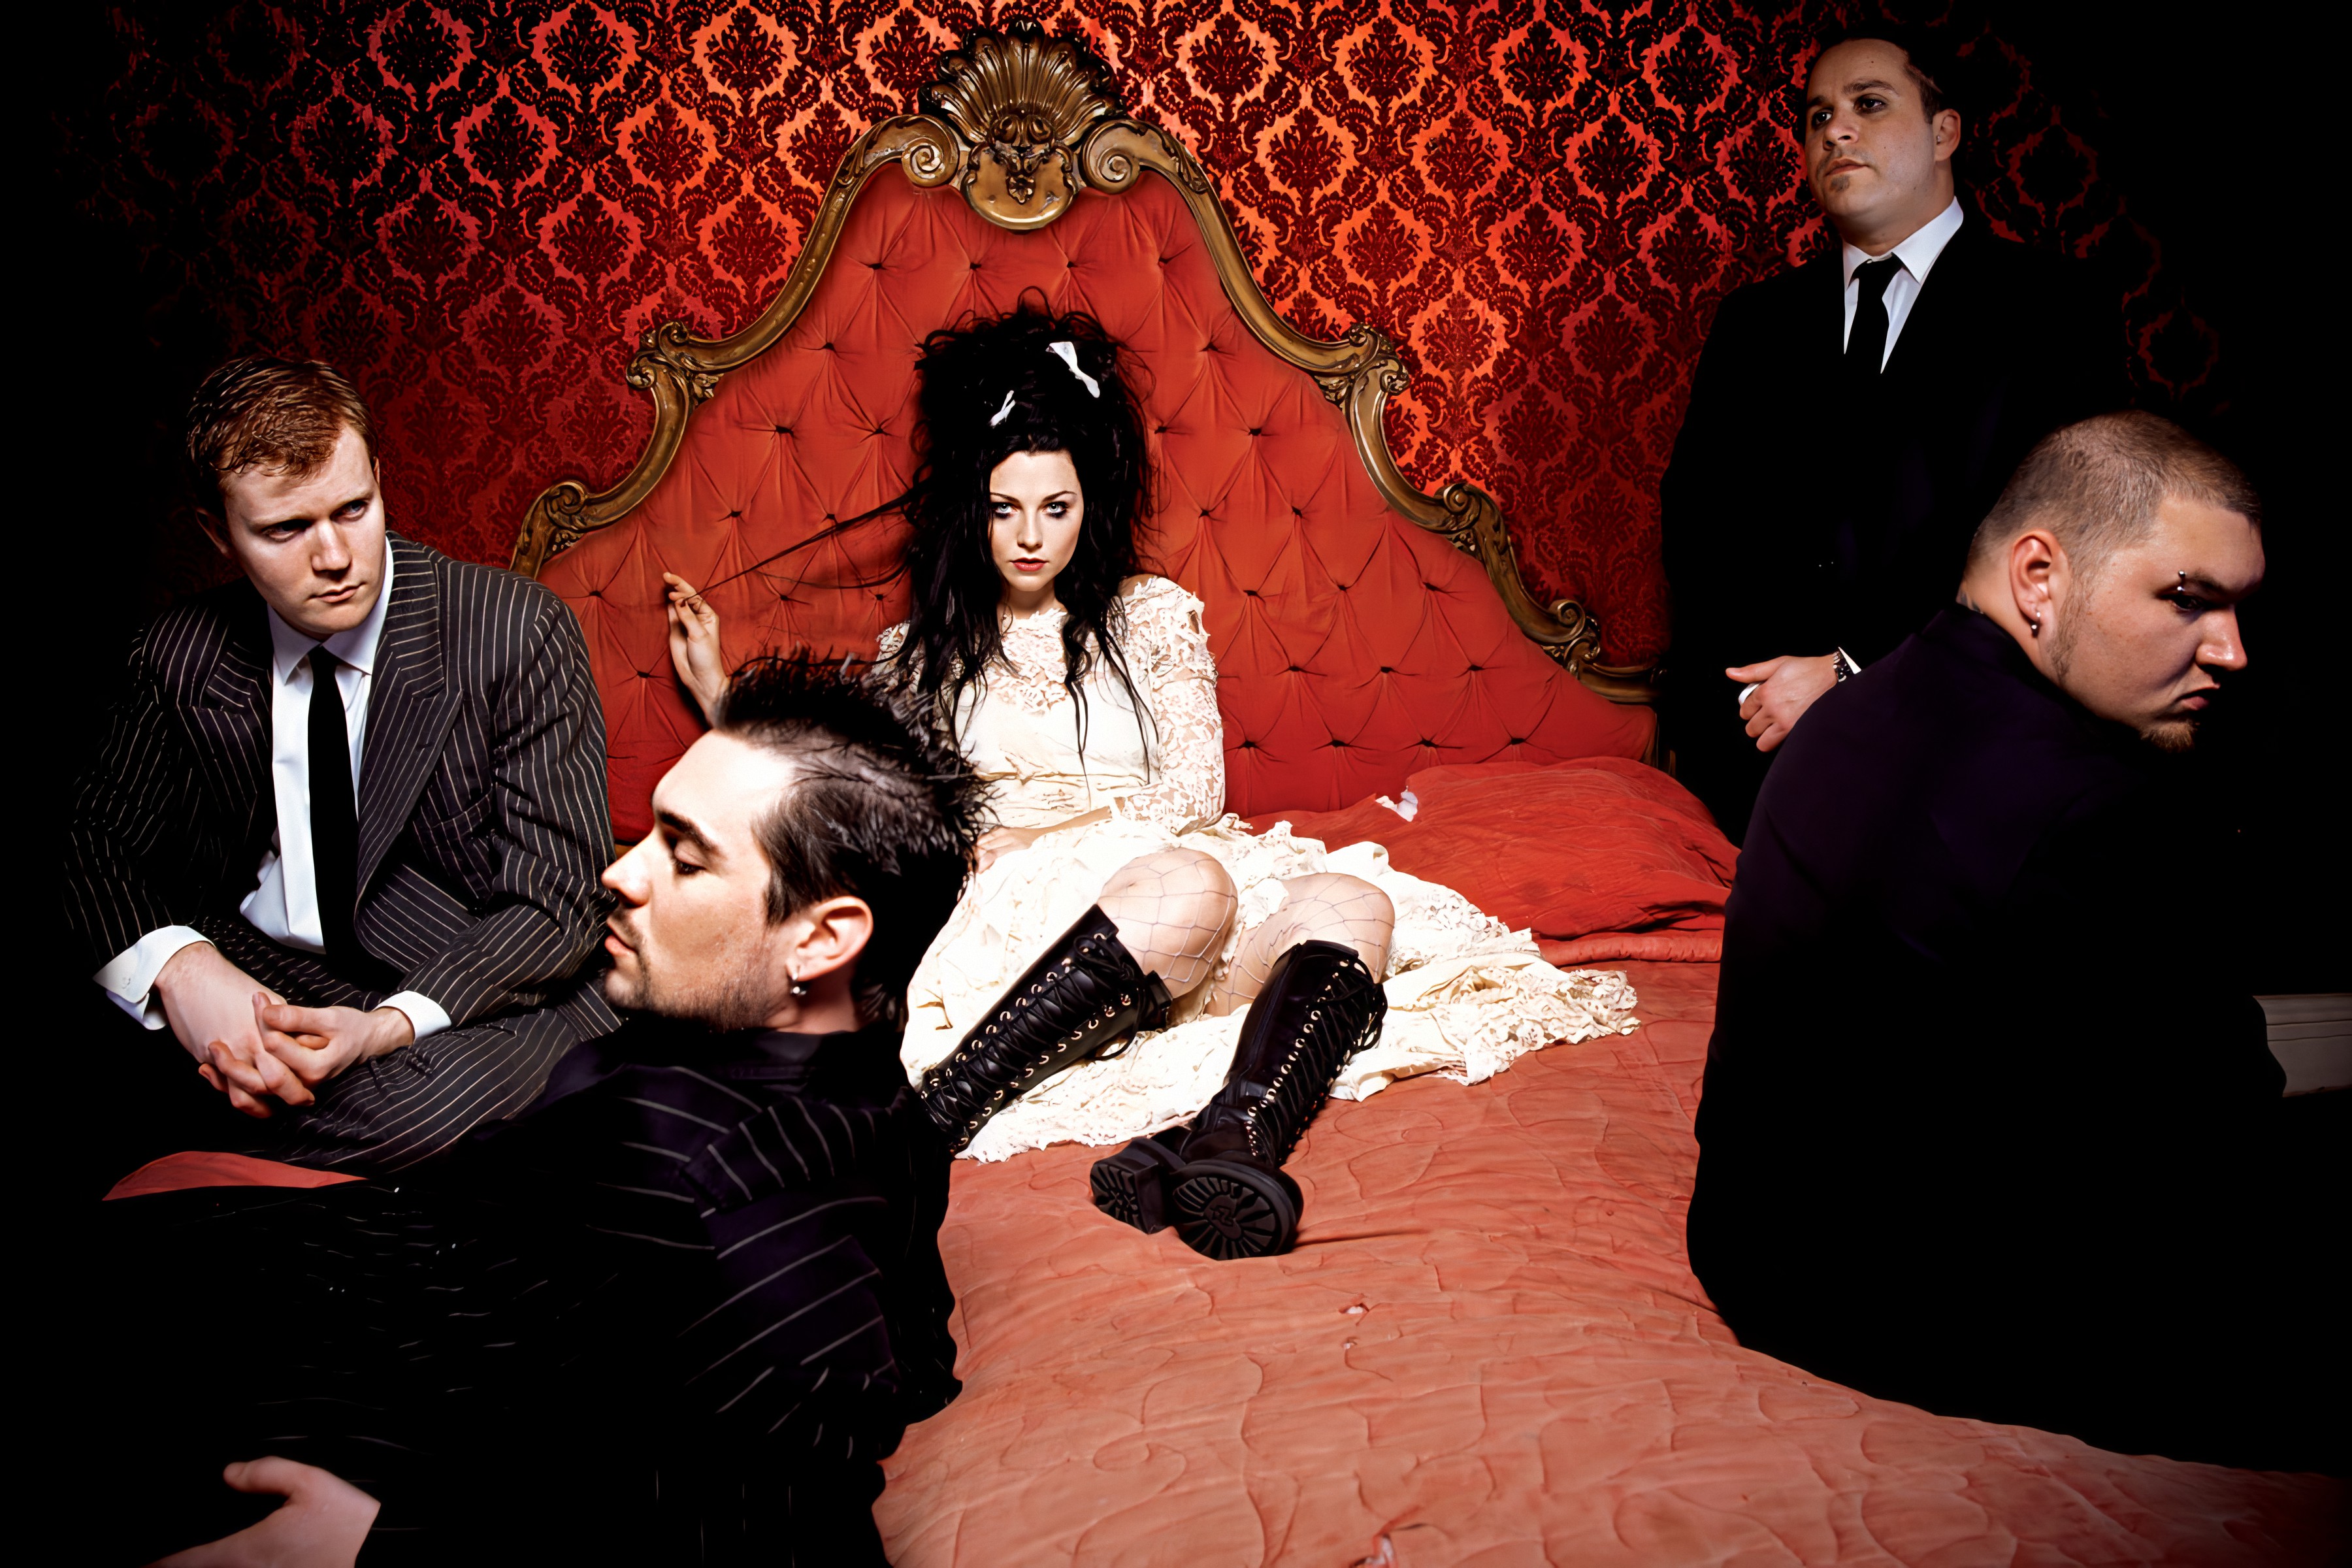 3600x2400
Keywords: anywhere but home;dvd;promo;photoshoot;evanescence;band;red